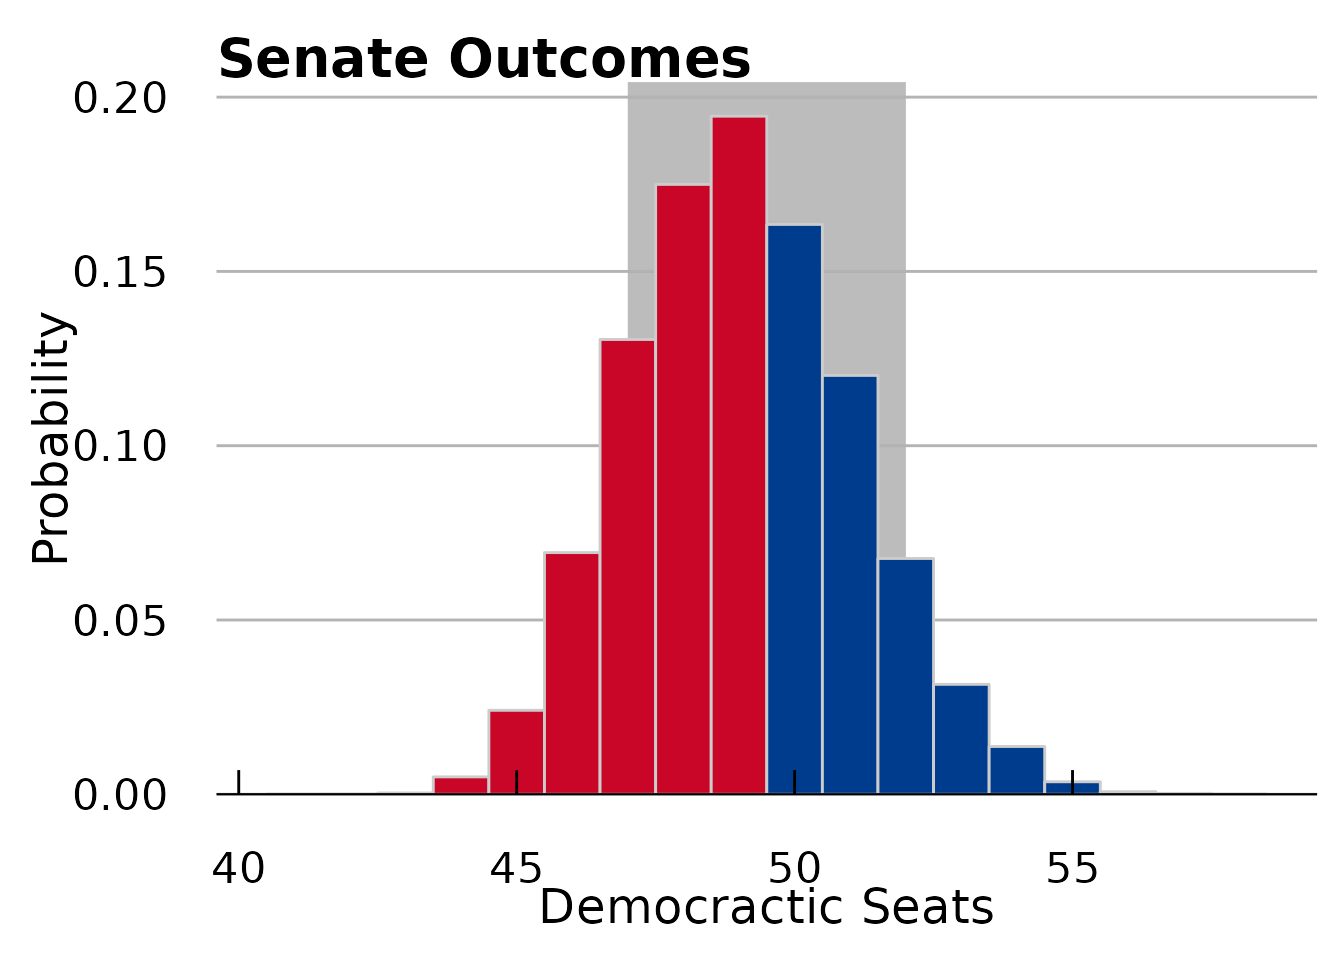 Expected number of seats won by Democratics in the Senate